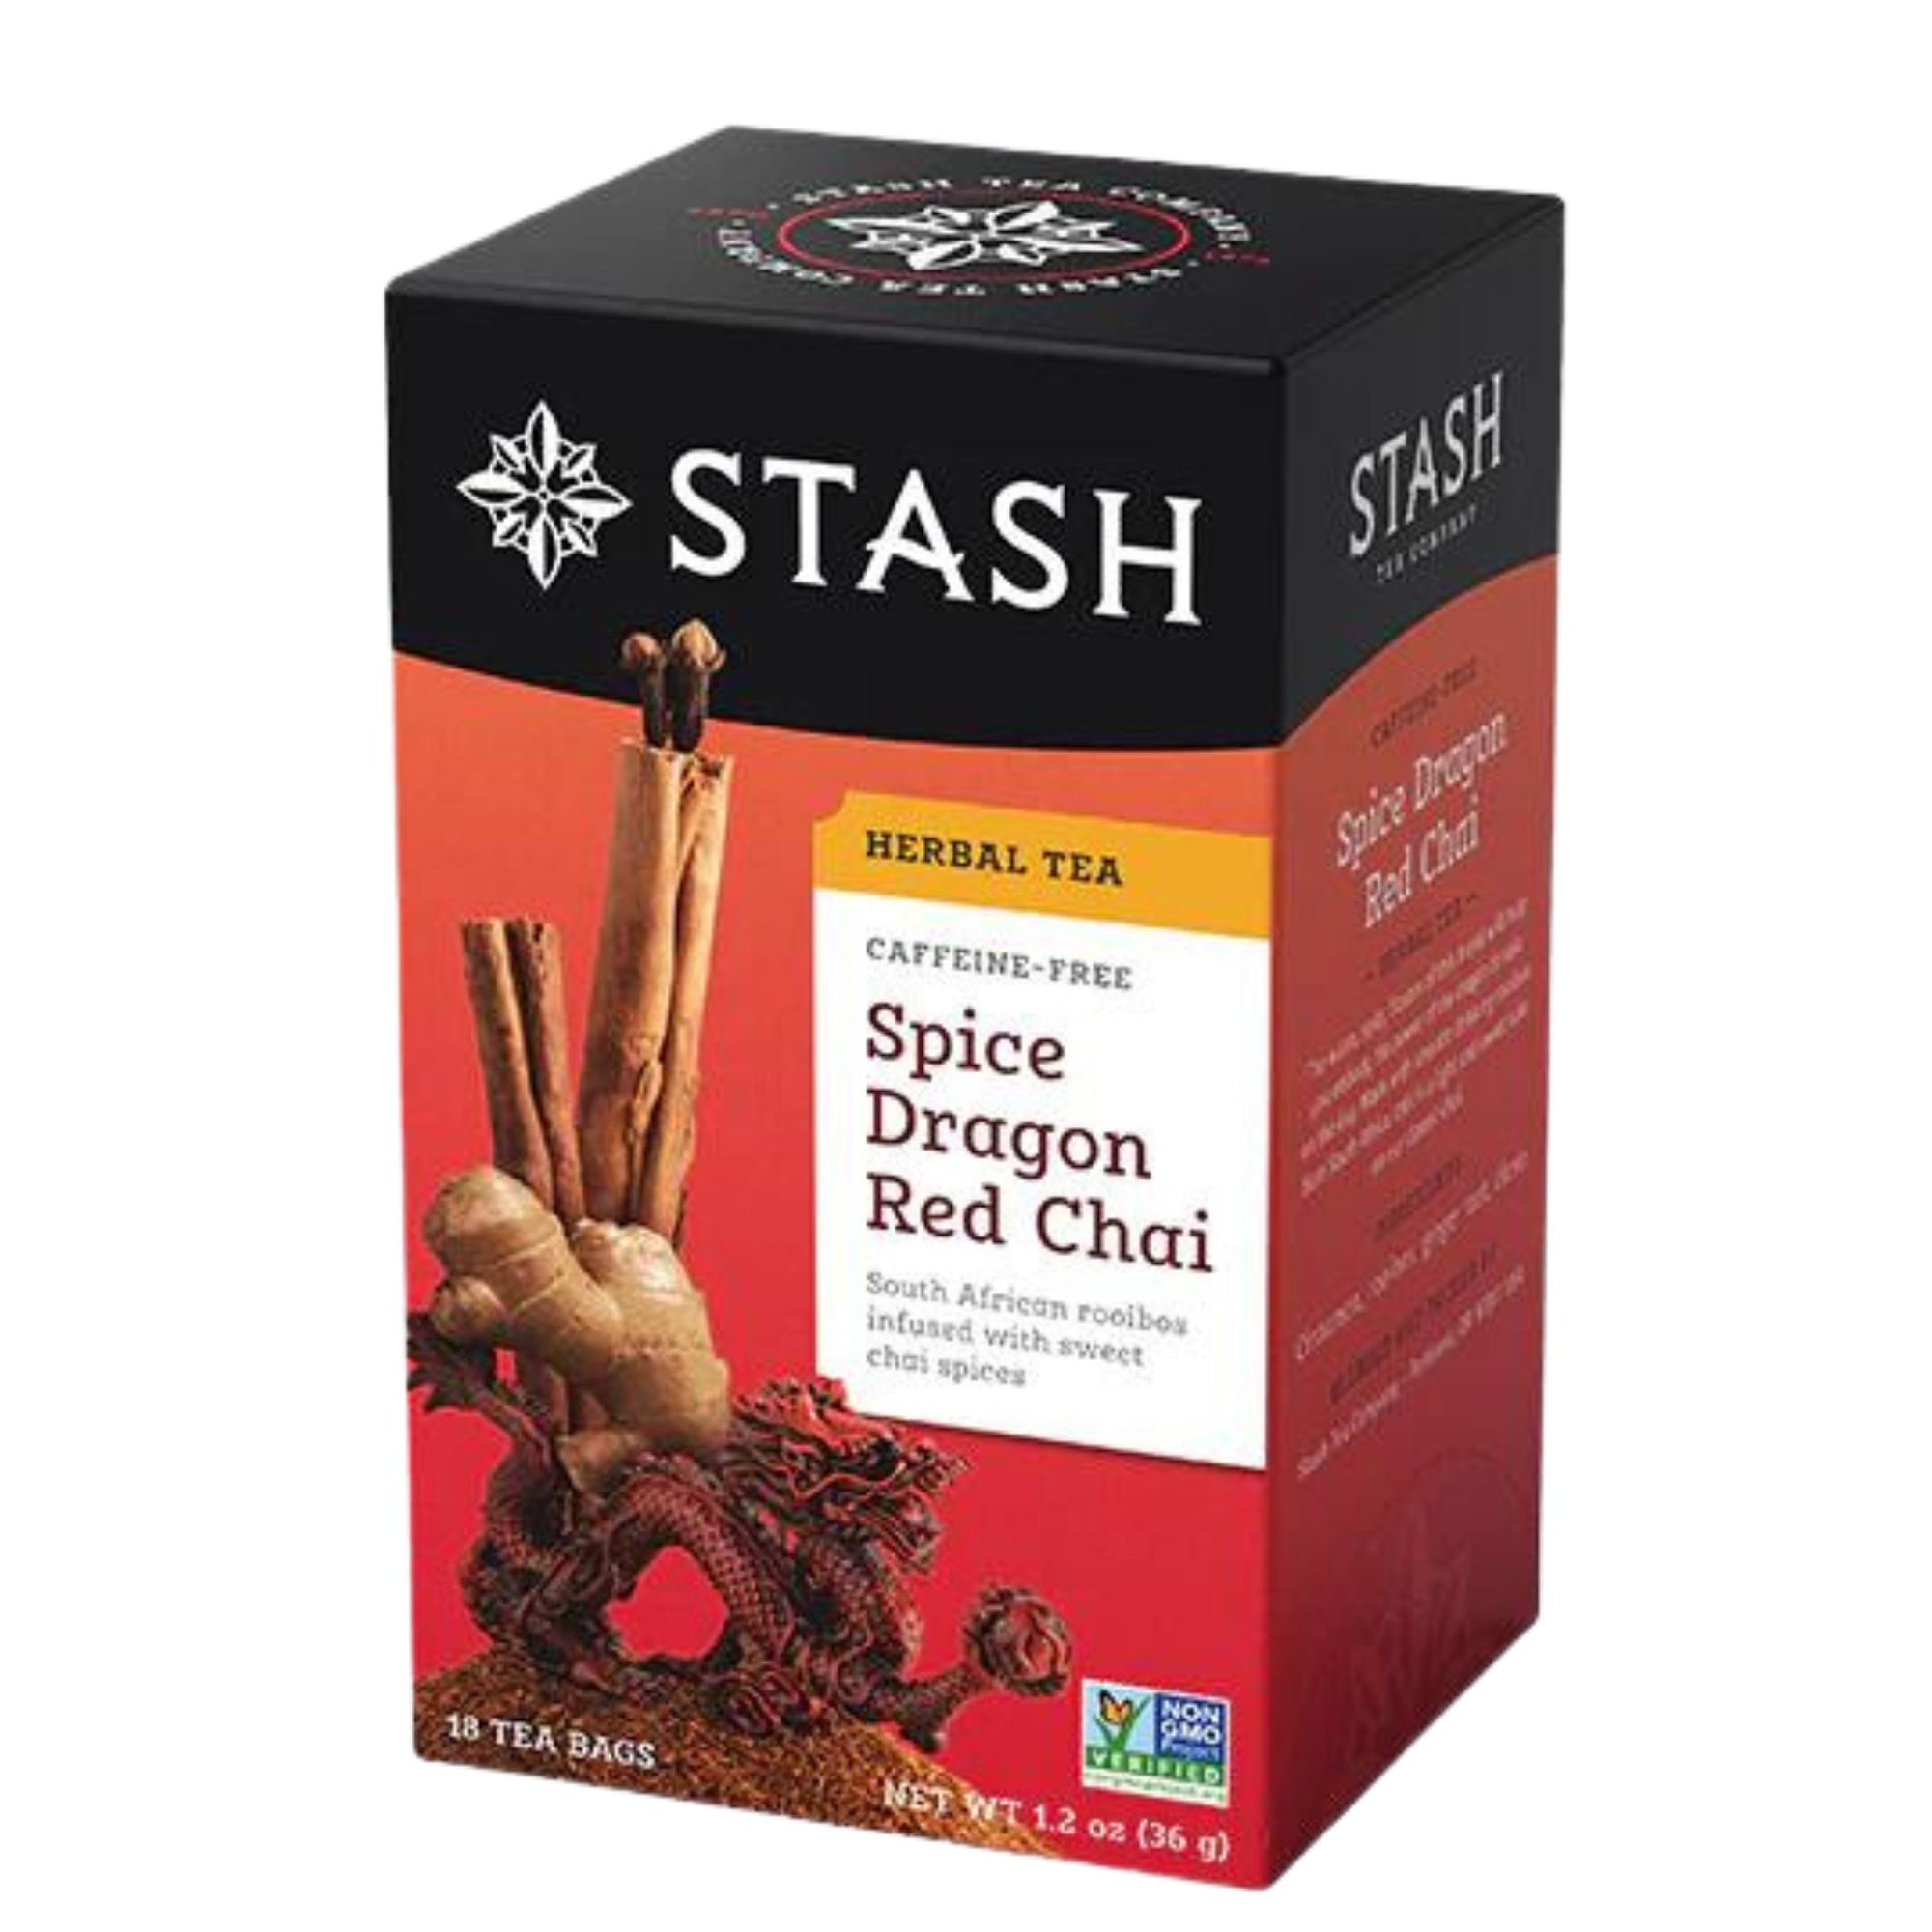 Stash Spice Dragon Red Chai Tea - 18 tea bags in a box - South African rooibos infused with sweet chai spices. 